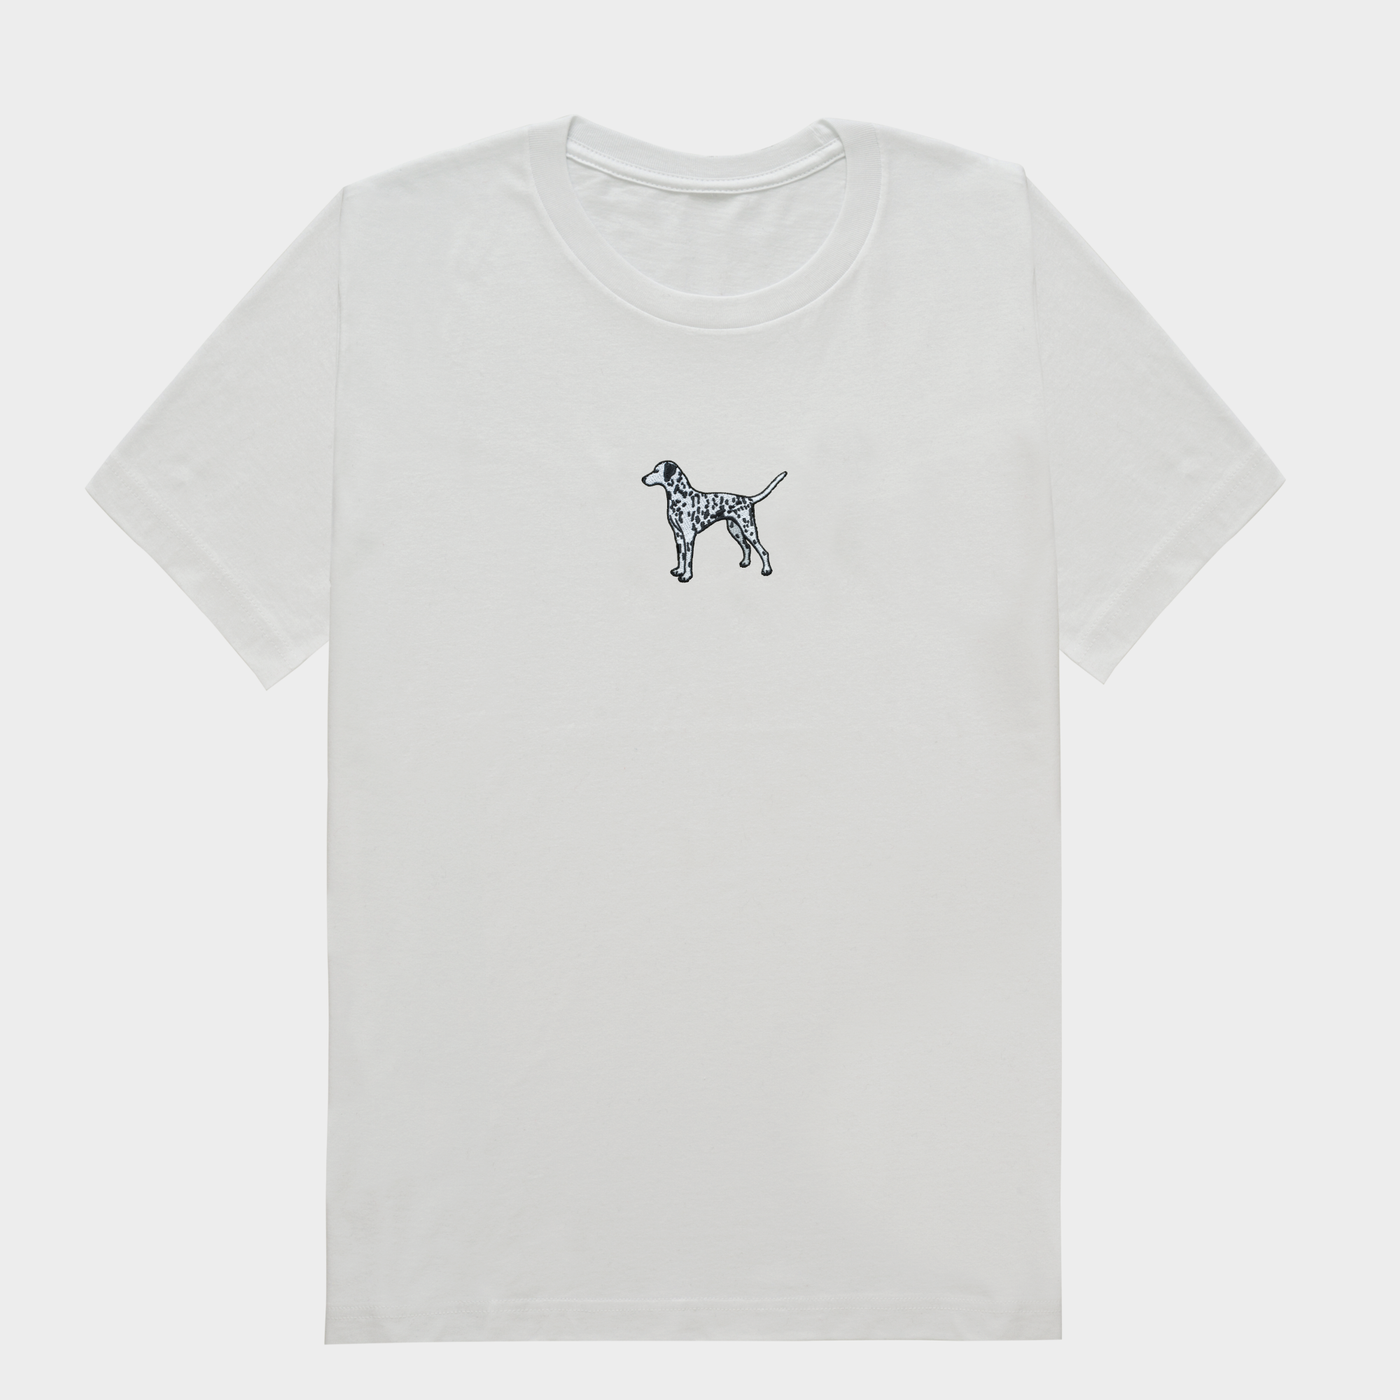 Bobby's Planet Women's Embroidered Dalmatian T-Shirt from Paws Dog Cat Animals Collection in White Color#color_white